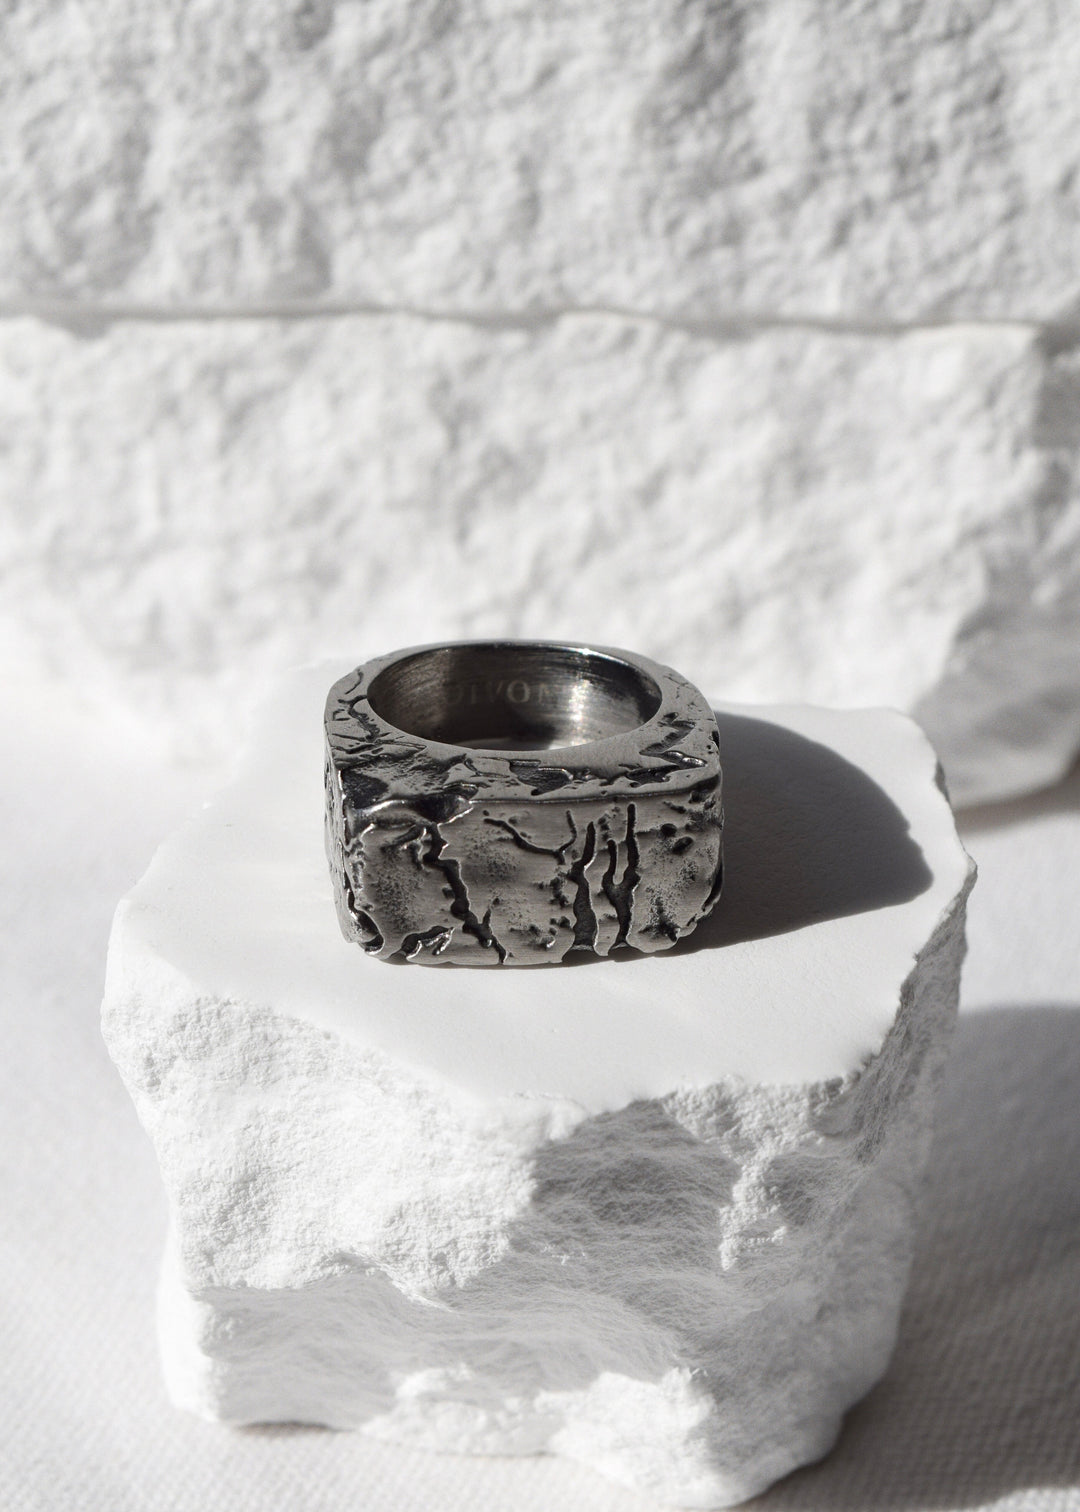 A silver DIVON ring sitting on top of a rock.